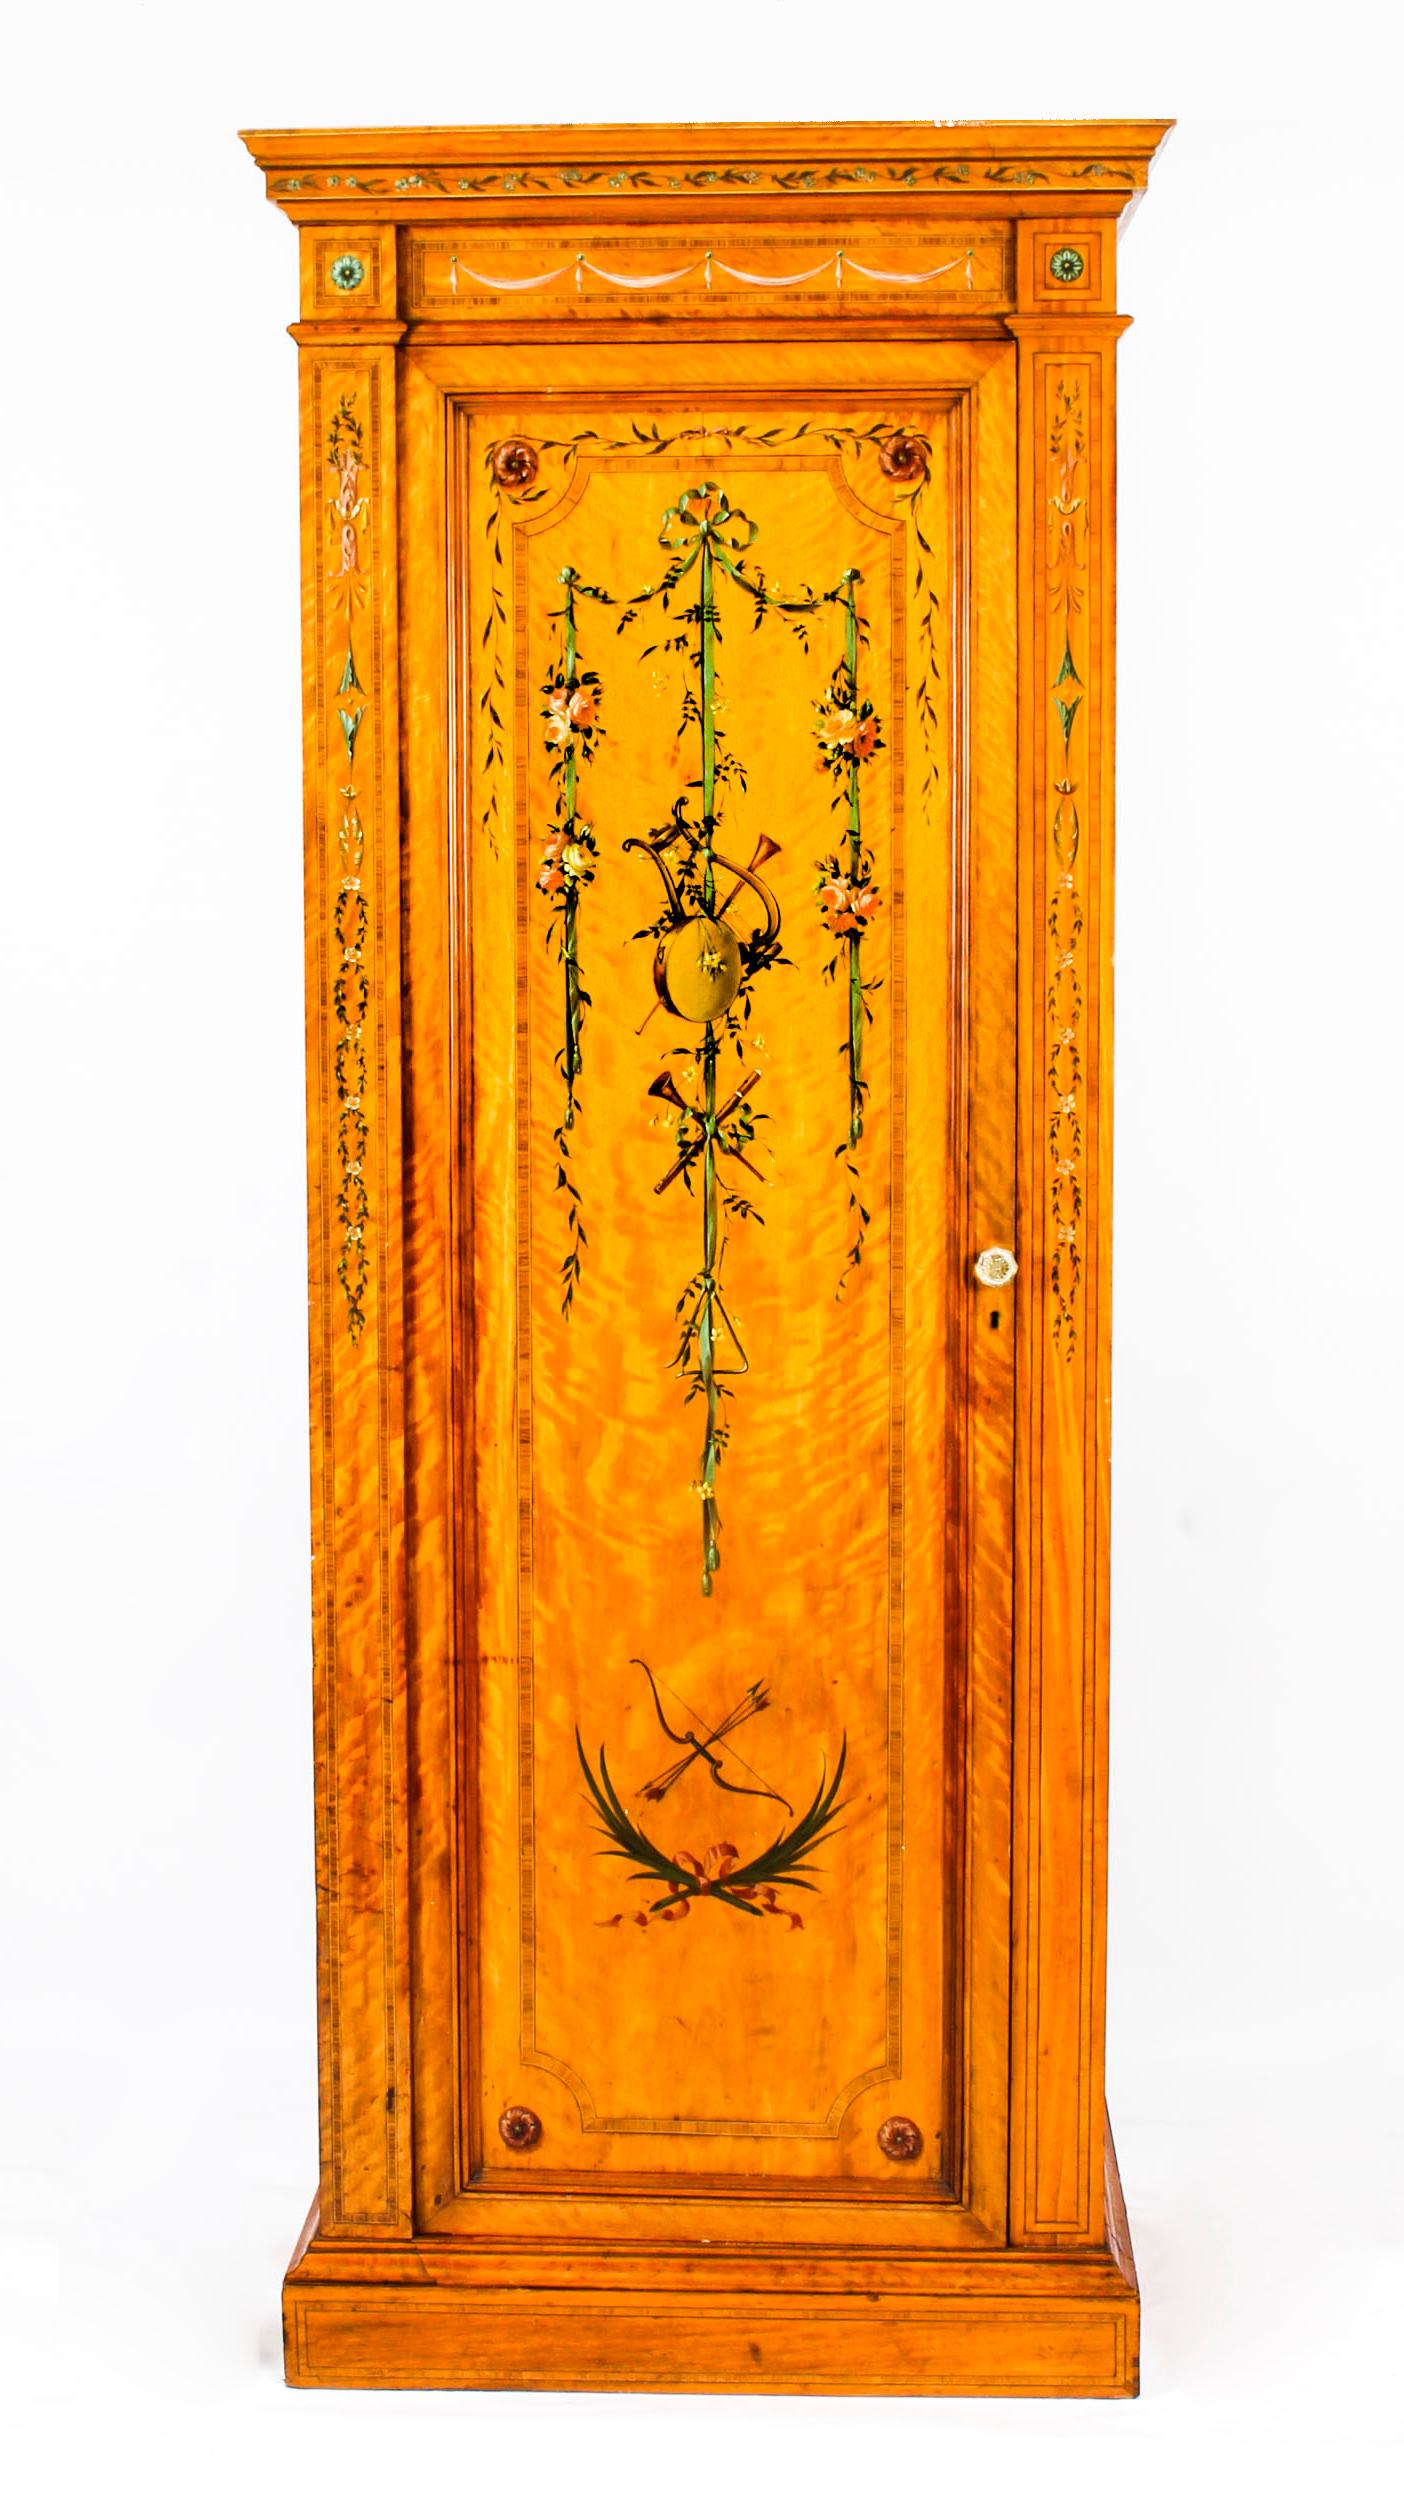 This is an impressive and rare antique English late Victorian Sheraton style satinwood wardrobe, circa 1880 in date.
 
This wonderful wardrobe is made from the finest quality satinwood and features magnificent hand painted ribbon-tied garlands,